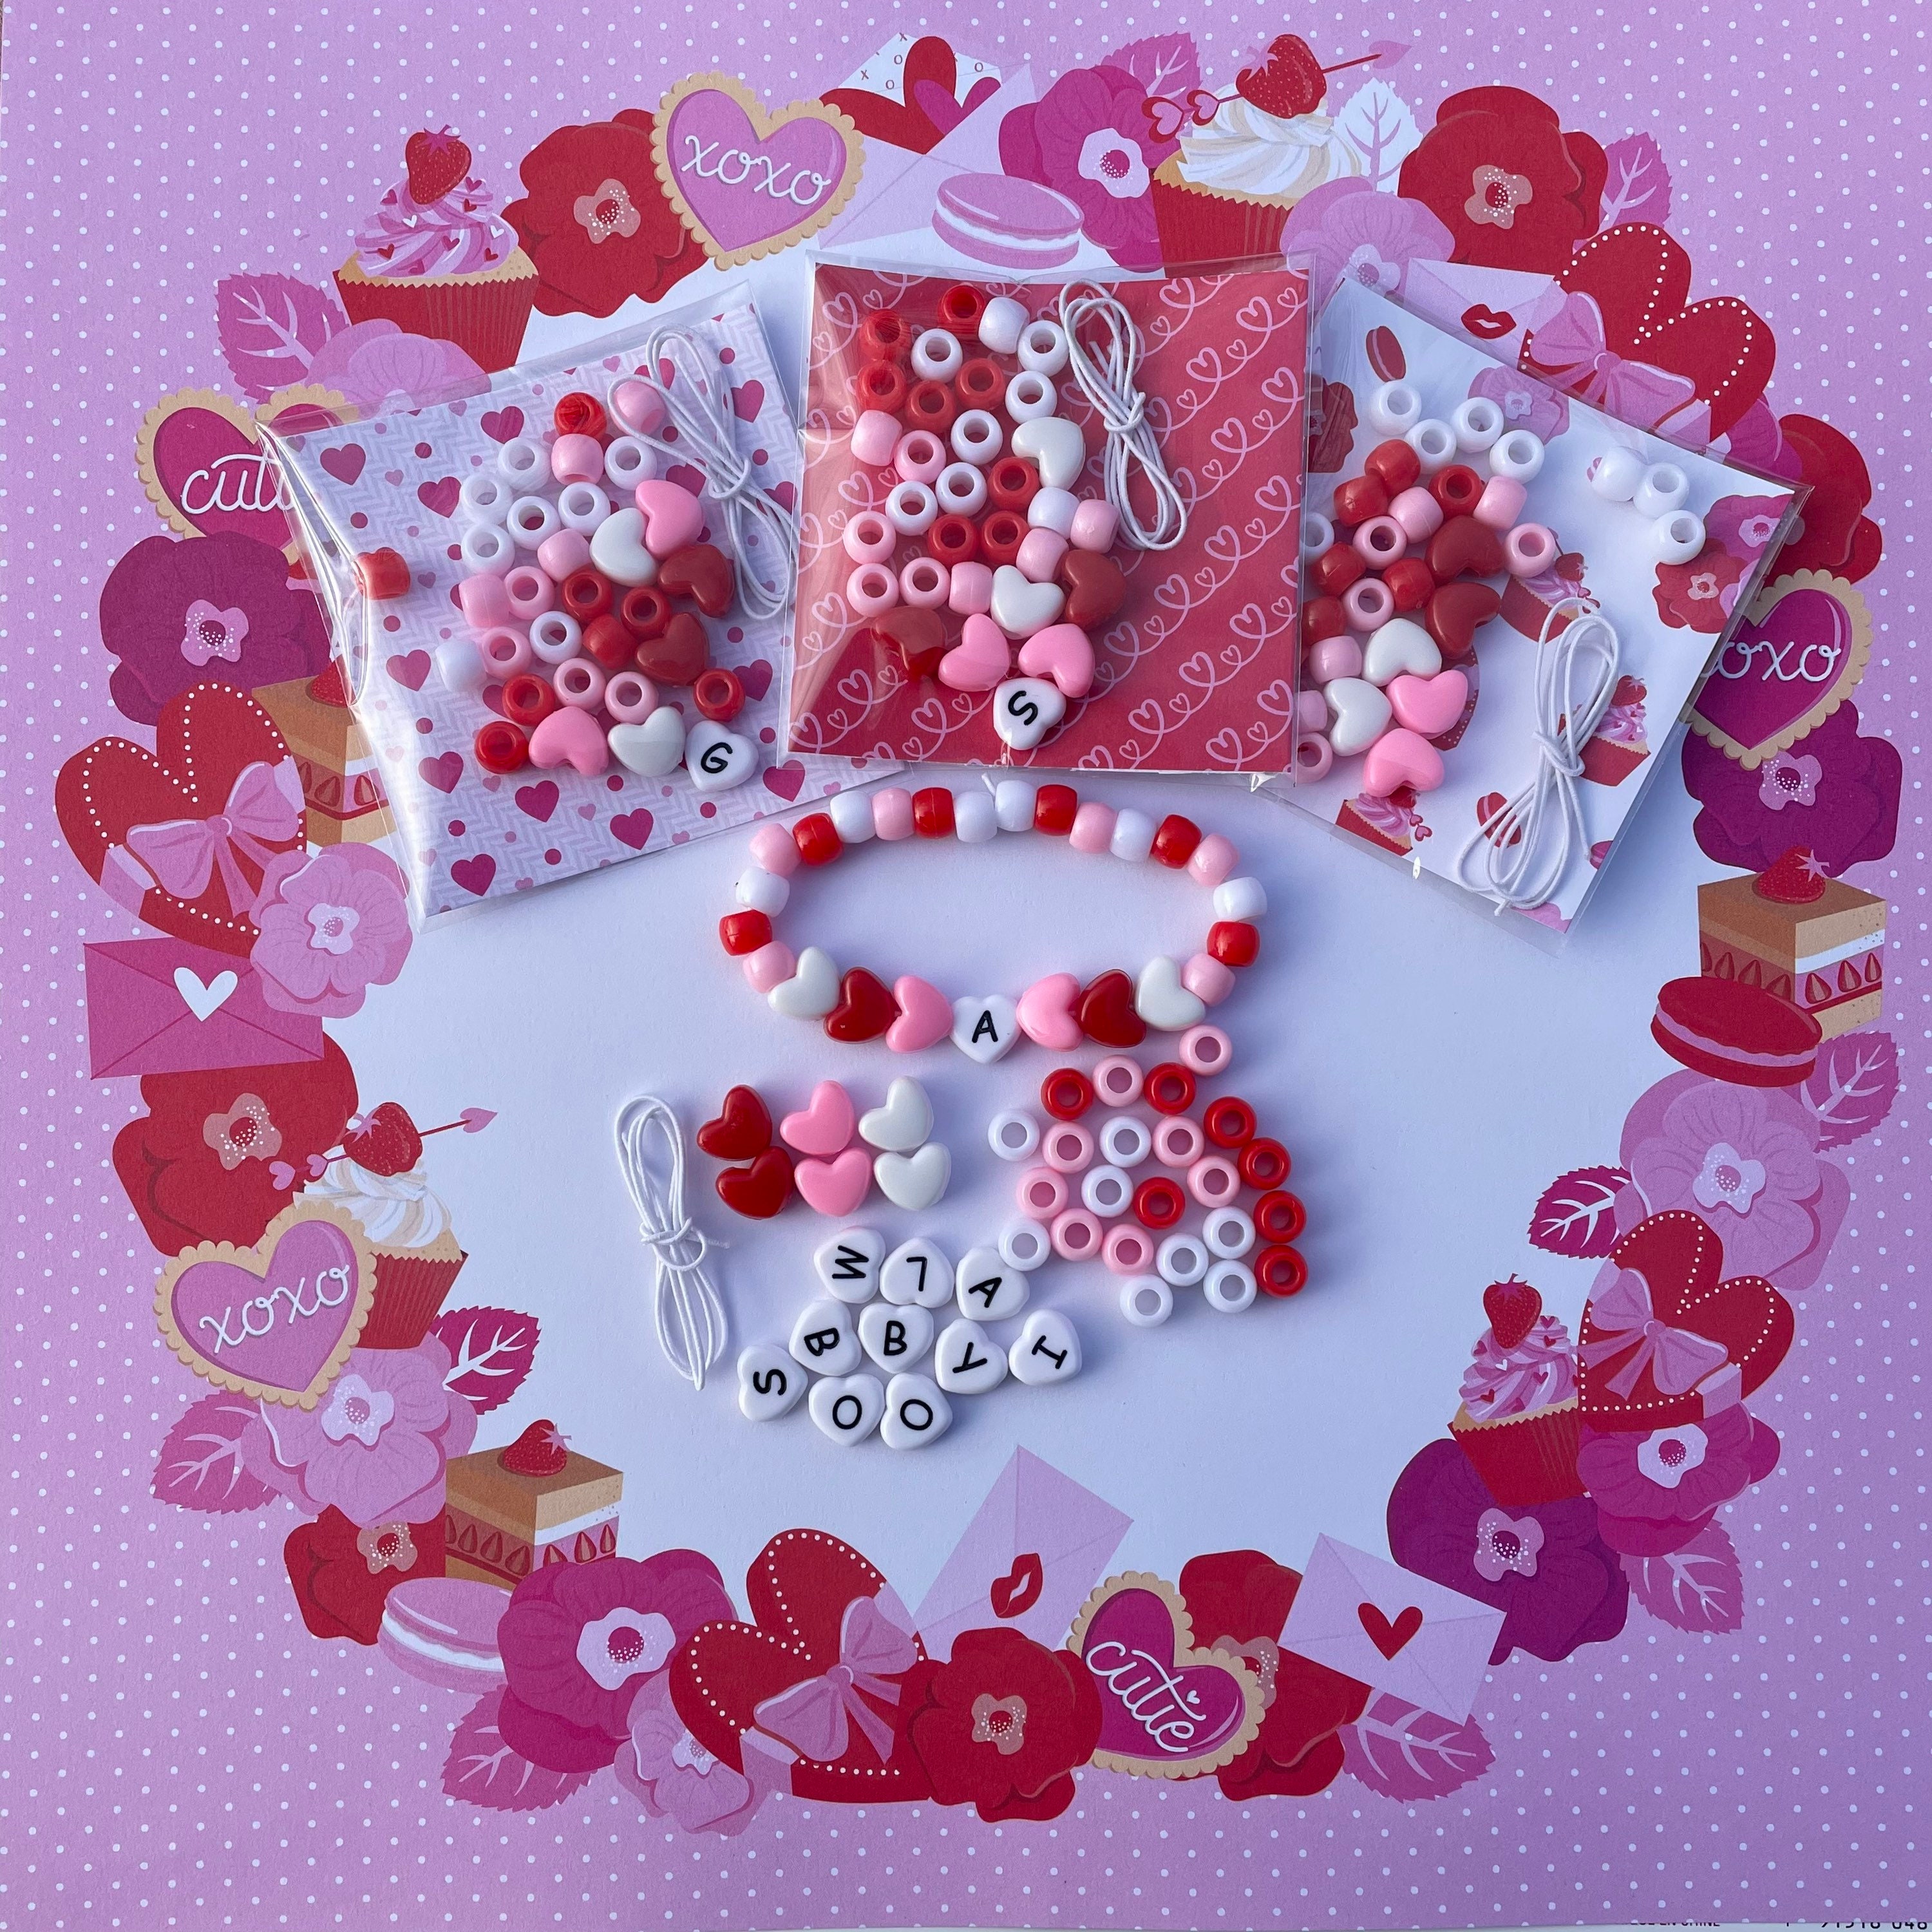 Valentines Day Gifts for Kids - 24 Pack Valentines Cards with Heart POP  Bracelets - Sensory Fidget Toys Valentine for School Classroom Gift  Exchange